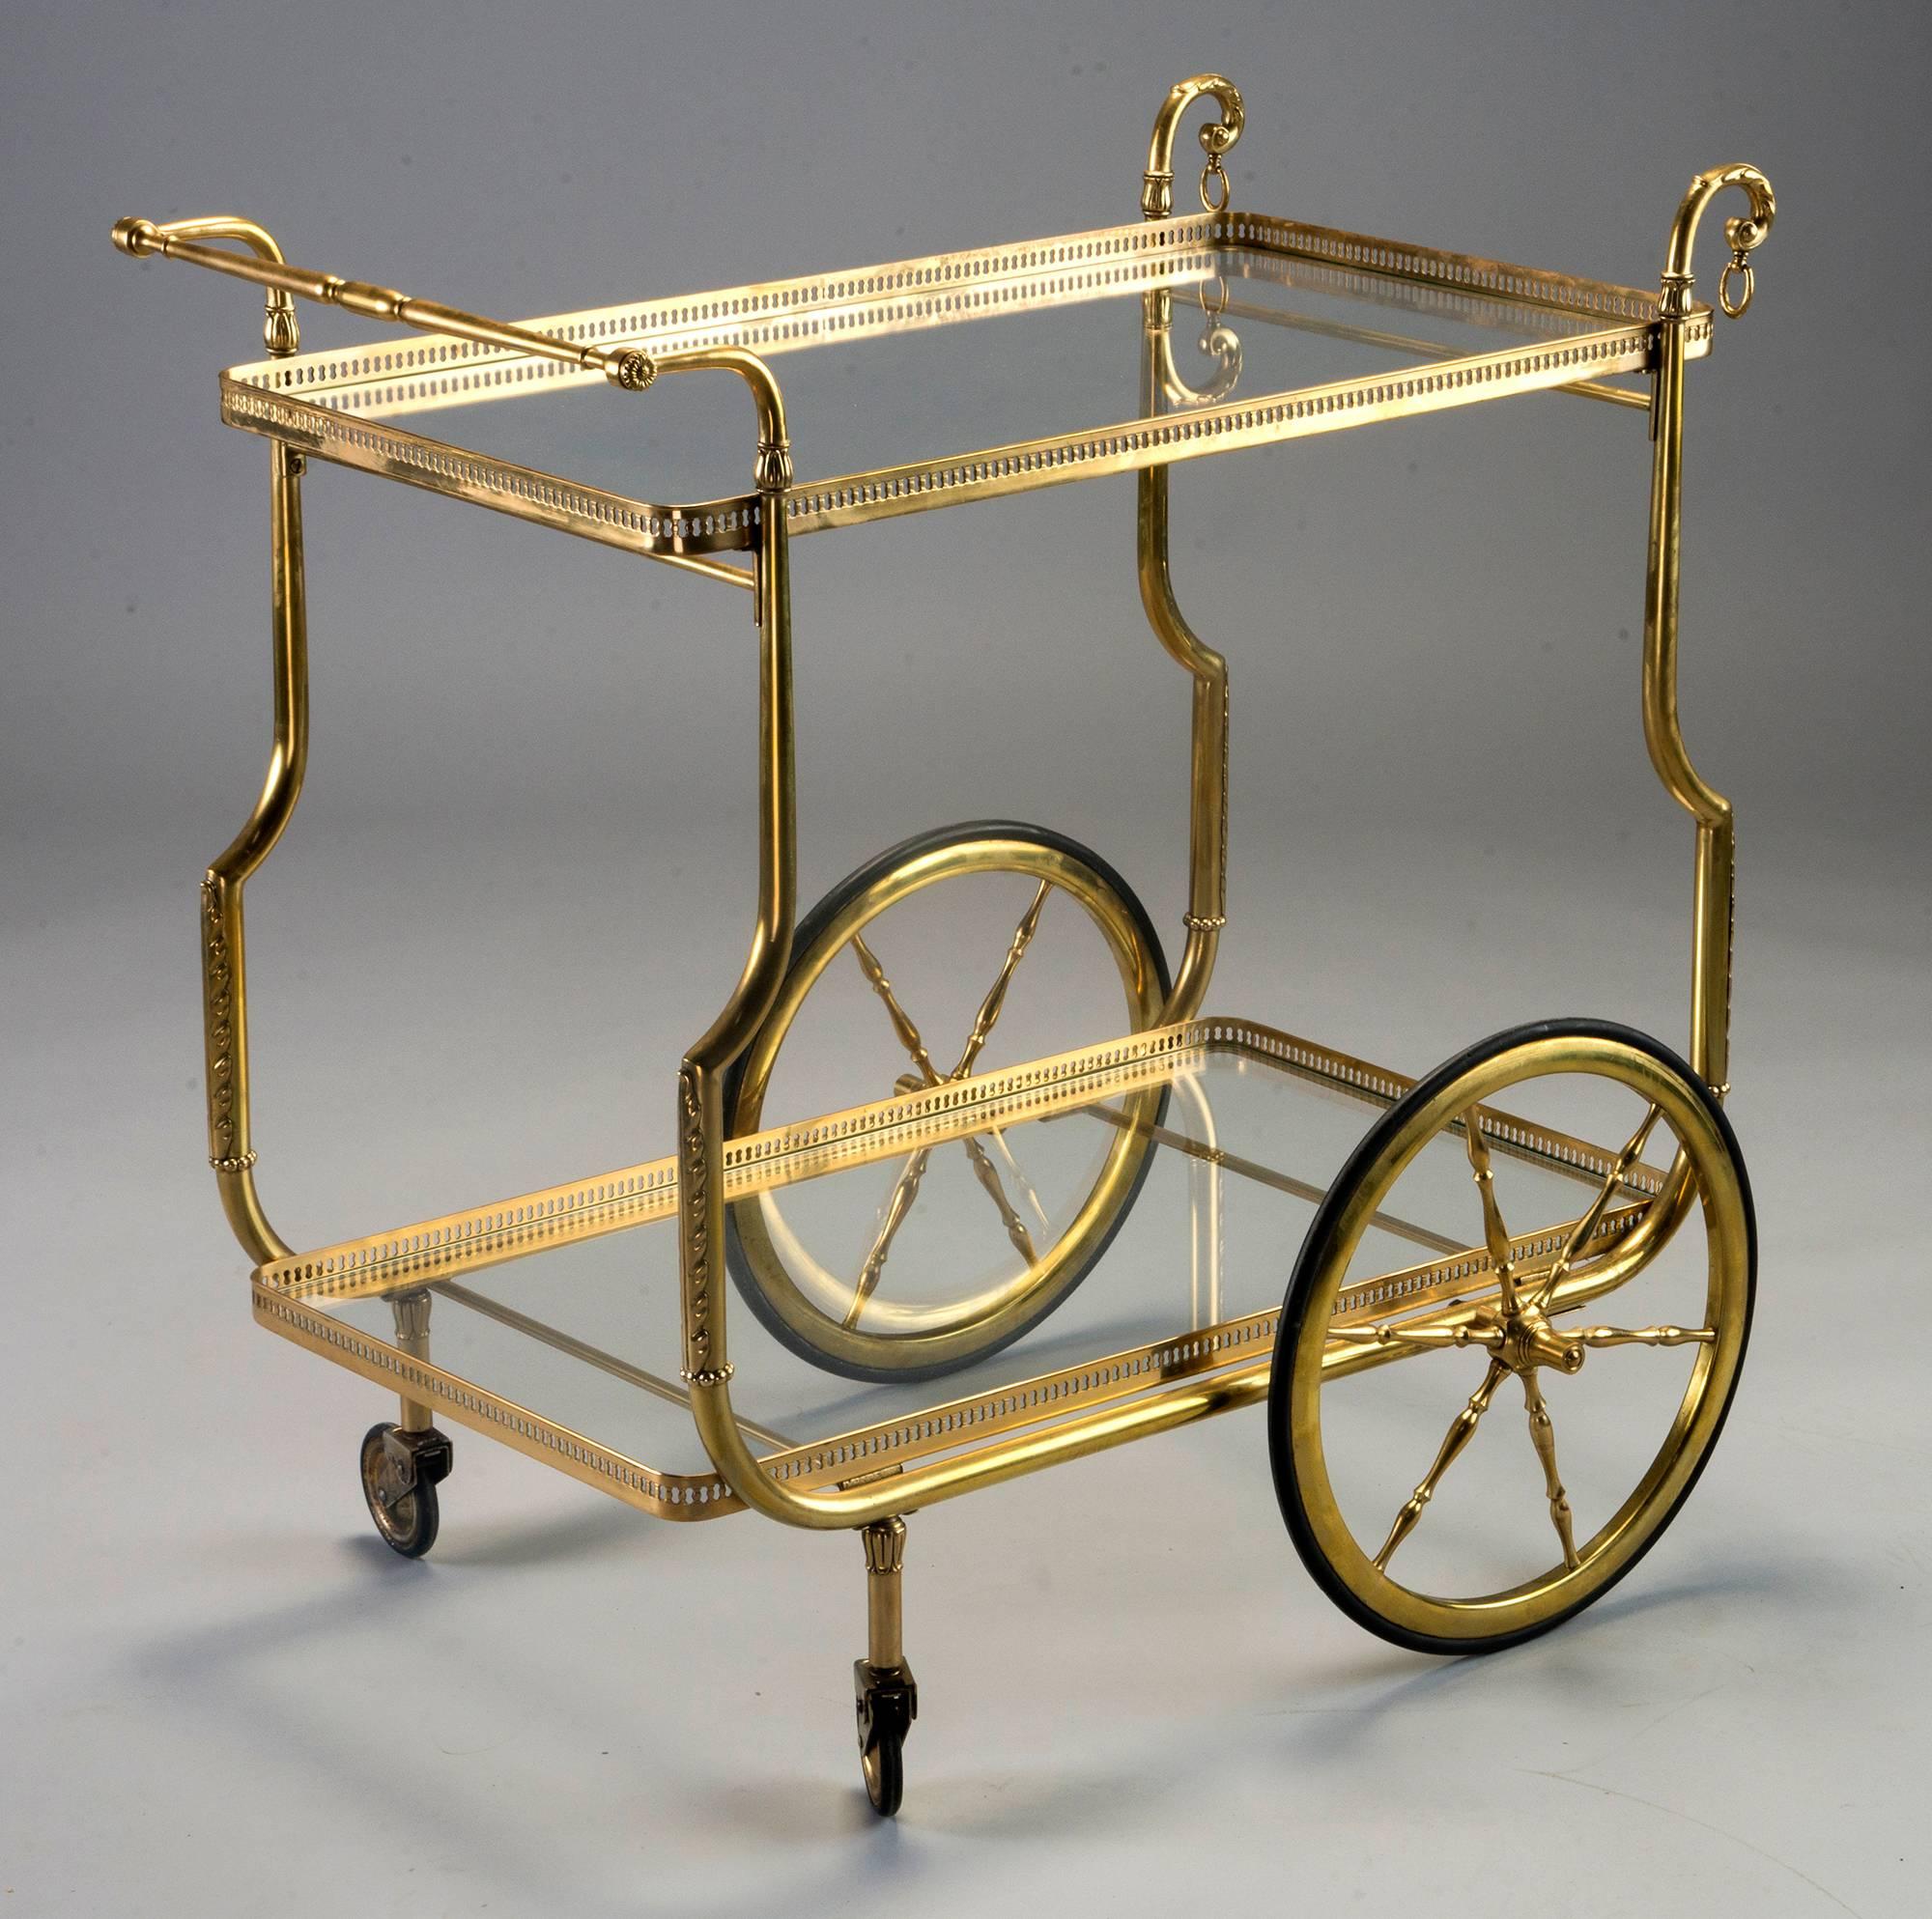 Brass frame trolley has two clear glass shelves with open work brass galleries, circa 1930s. Tray form shelves are not removable. Leaf form embellishments on lower supports of frame, decorative spokes on large wheels. Unknown maker. Found in France.